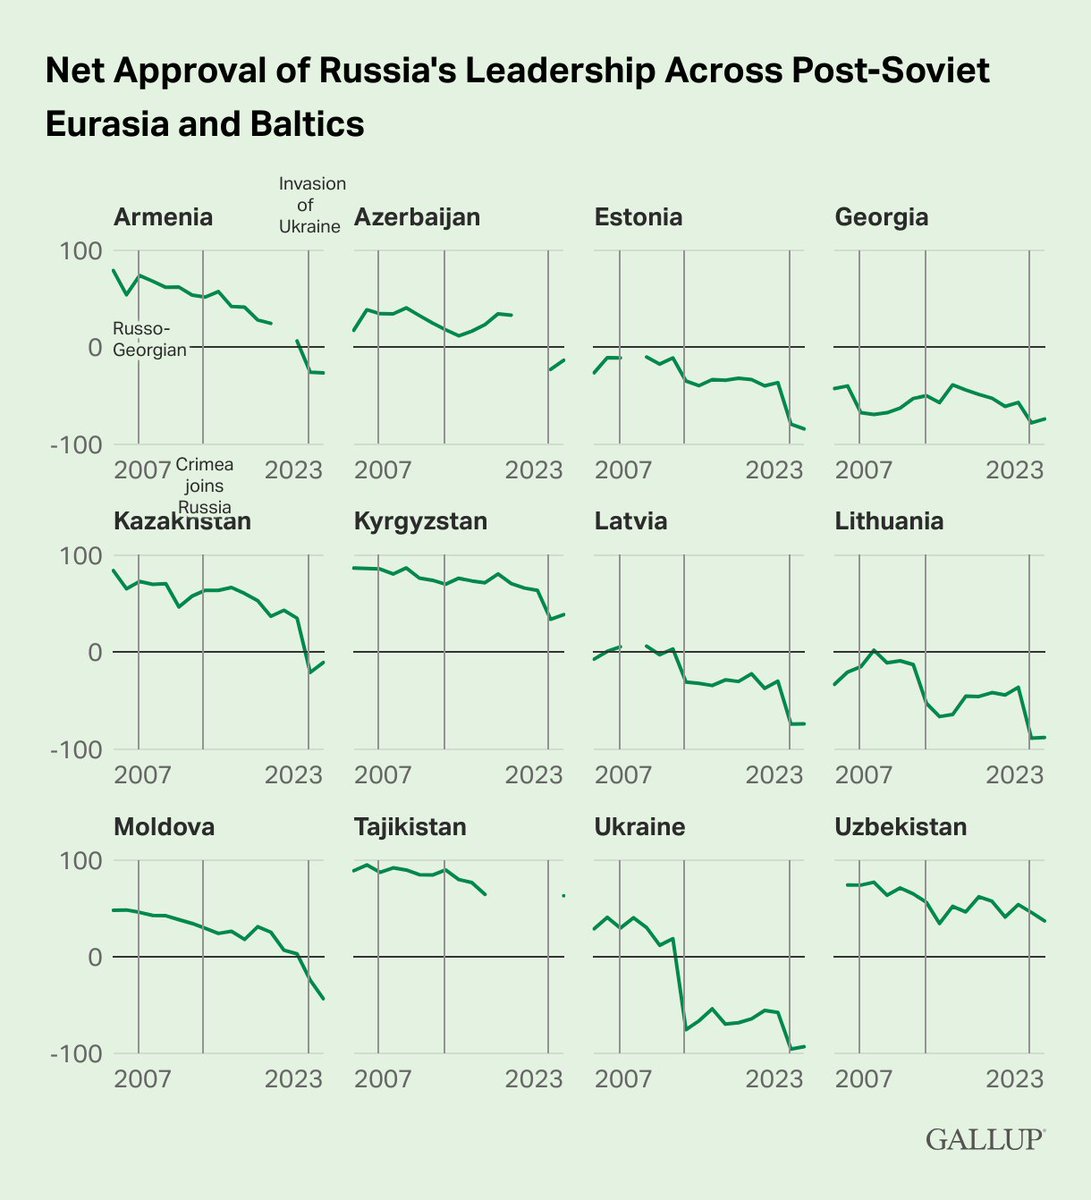 Russia’s fall from favor didn’t start with its invasion of Ukraine. Since 2000, Russia has engaged in military conflict with its neighbors three times. After each armed intervention, Russia’s net approval score declined across more and more of its neighbors. New data:…